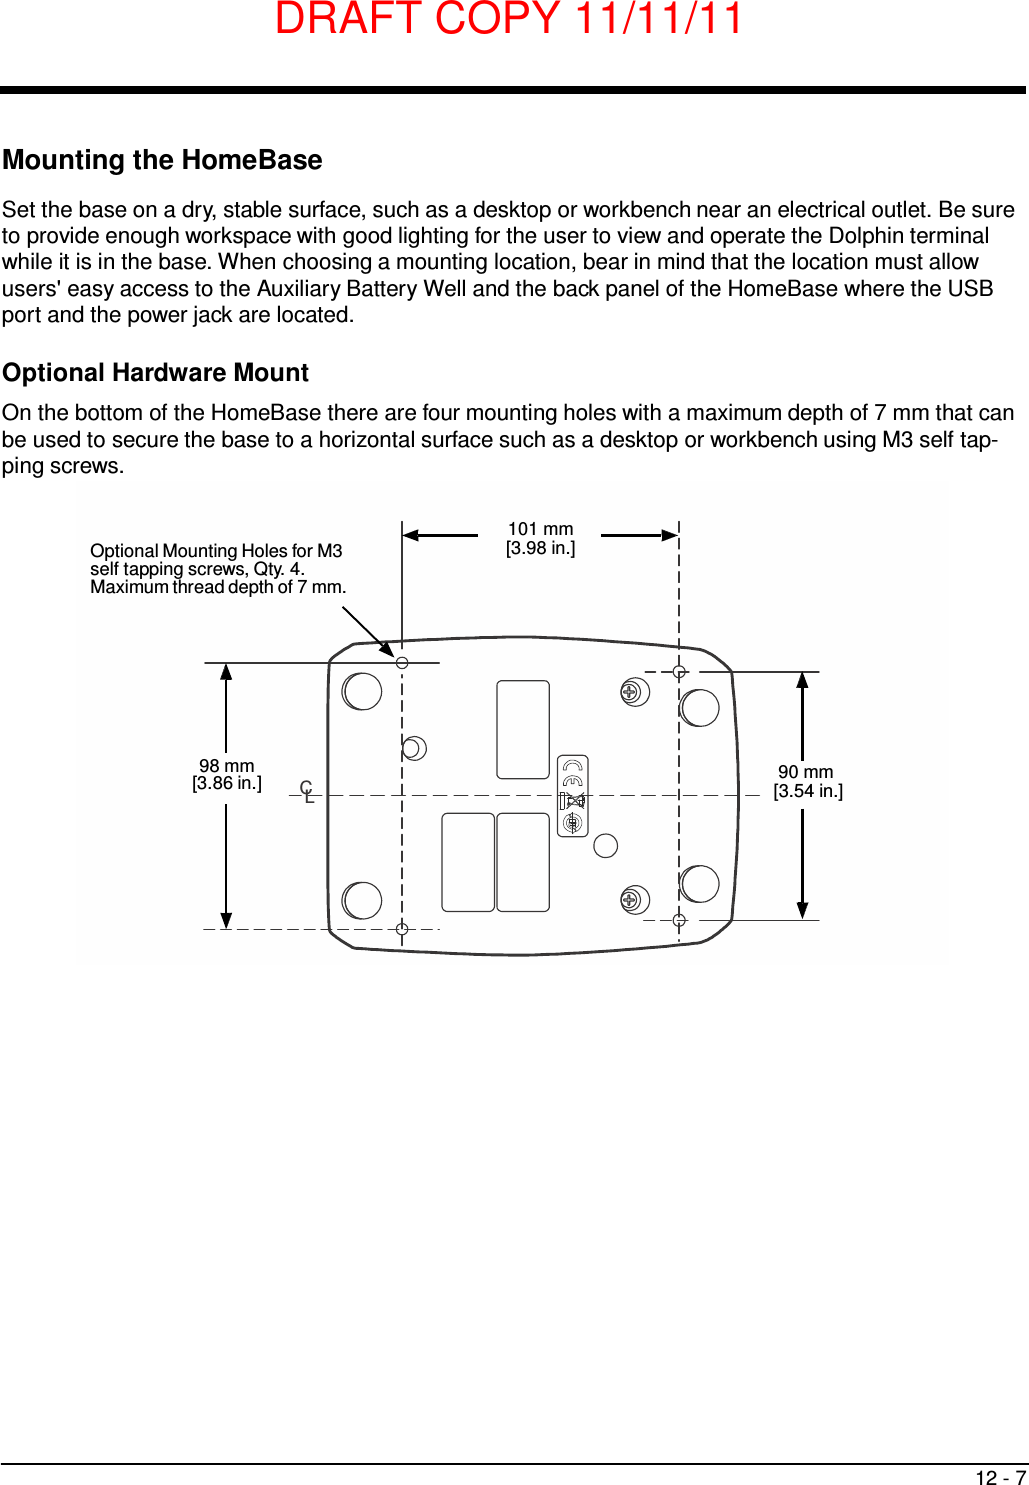 DRAFT COPY 11/11/11 12 - 7     Mounting the HomeBase  Set the base on a dry, stable surface, such as a desktop or workbench near an electrical outlet. Be sure to provide enough workspace with good lighting for the user to view and operate the Dolphin terminal while it is in the base. When choosing a mounting location, bear in mind that the location must allow users&apos; easy access to the Auxiliary Battery Well and the back panel of the HomeBase where the USB port and the power jack are located.  Optional Hardware Mount  On the bottom of the HomeBase there are four mounting holes with a maximum depth of 7 mm that can be used to secure the base to a horizontal surface such as a desktop or workbench using M3 self tap- ping screws.    Optional Mounting Holes for M3 self tapping screws, Qty. 4. Maximum thread depth of 7 mm. 101 mm [3.98 in.]         98 mm [3.86 in.]  CL 90 mm [3.54 in.] 